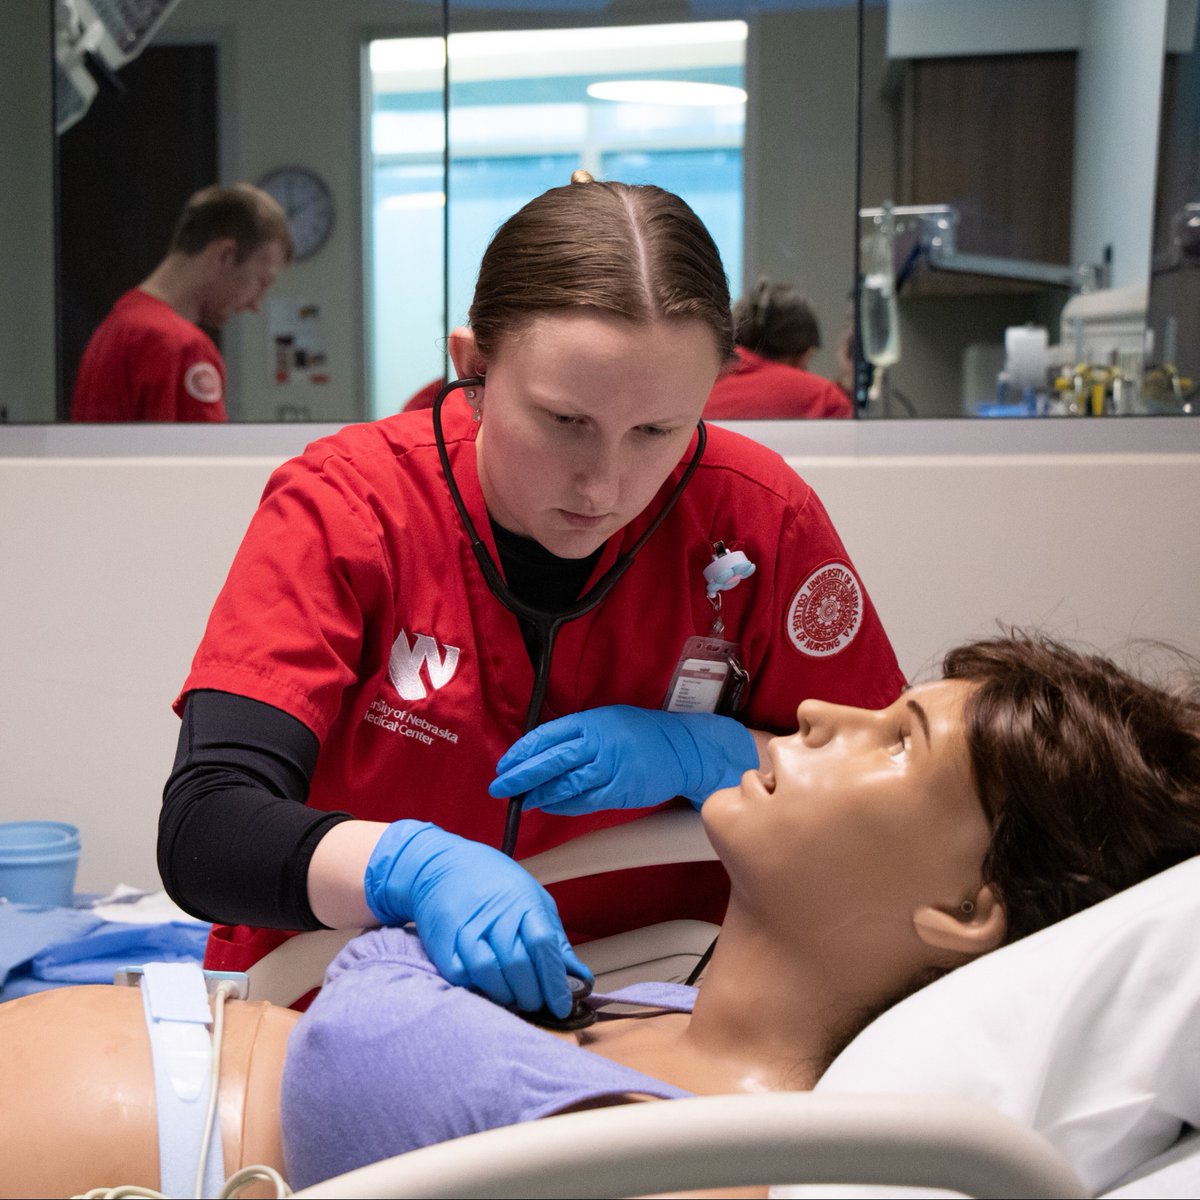 This week with Women's Health Wednesday we continue to celebrate Nurses Week! 🏥 @unmc & @NebraskaMed Women and Infant Services & Labor and Delivery Nurses make a huge impact practicing their skills and enhancing care in women's health every day! #NursesWeek #WomensHealthMonth